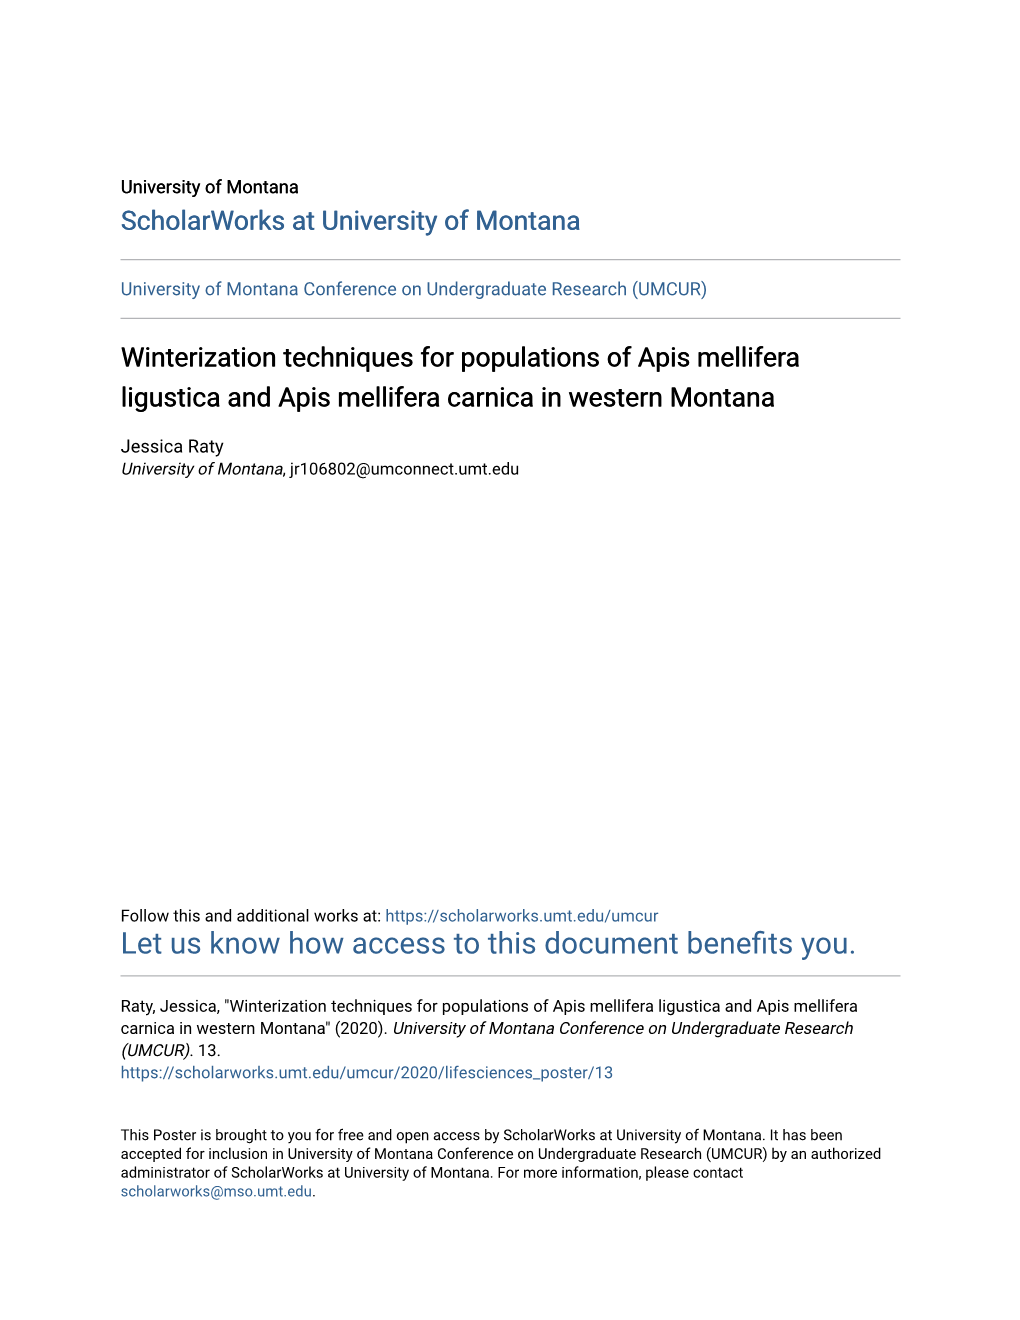 Winterization Techniques for Populations of Apis Mellifera Ligustica and Apis Mellifera Carnica in Western Montana